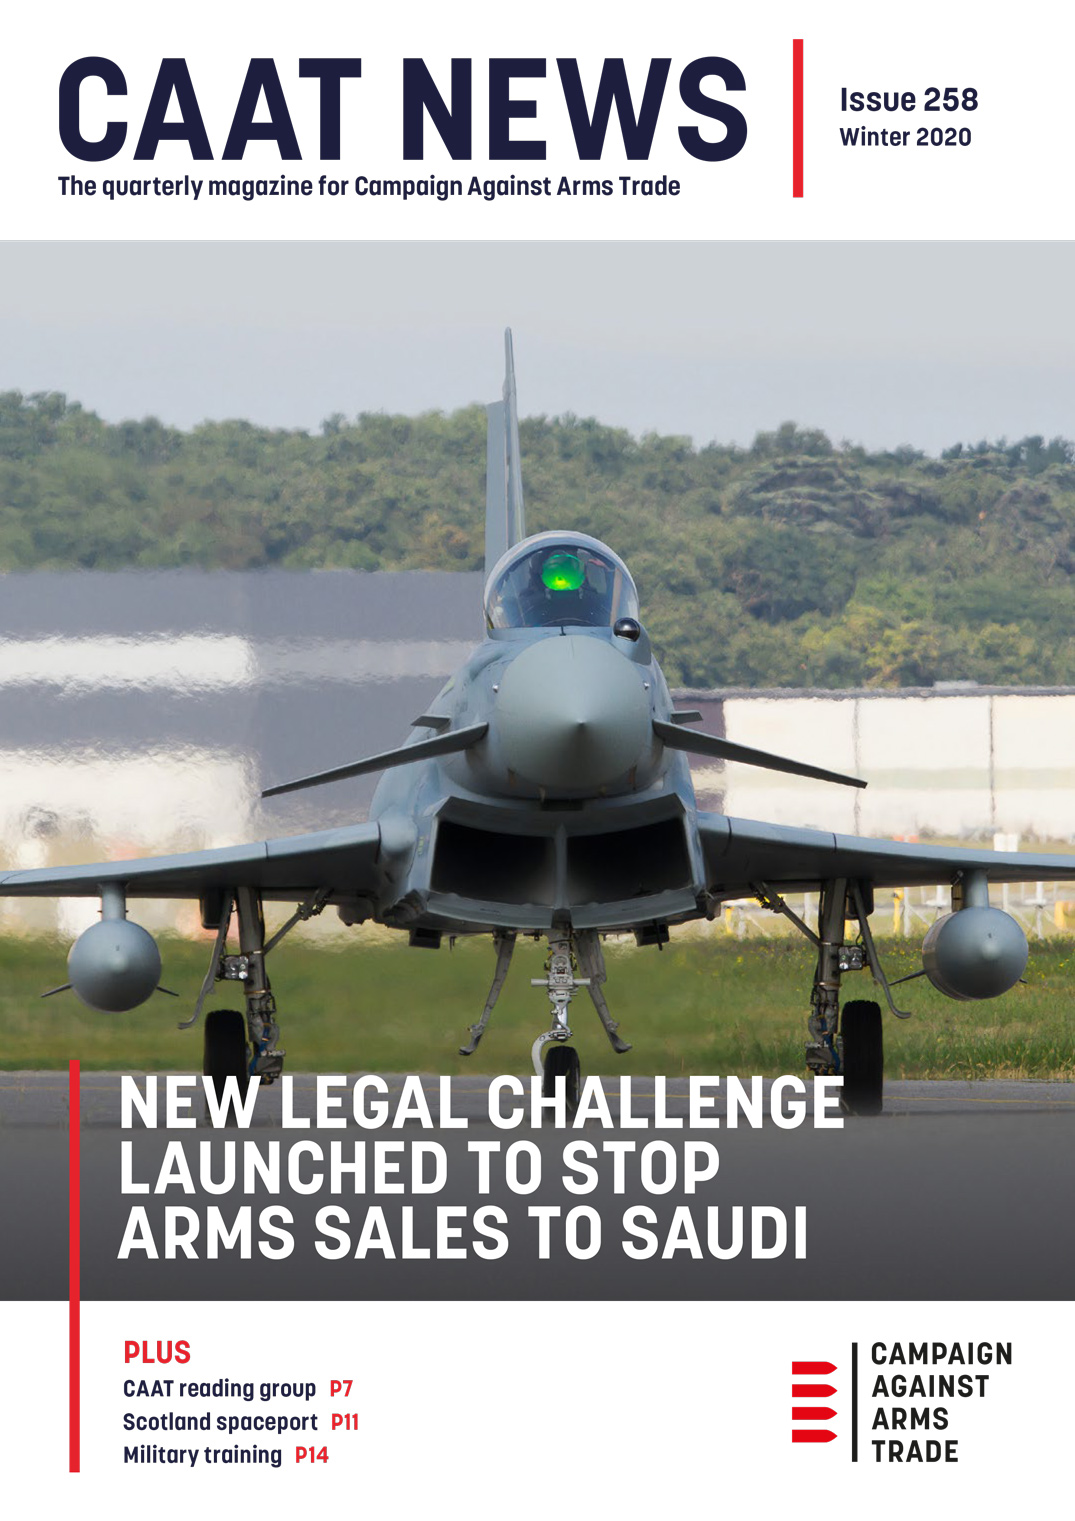 Cover of CAAT News issue 258 with image of fighter jet and headline "New legal challenge launched to stop arms sales to Saudi"